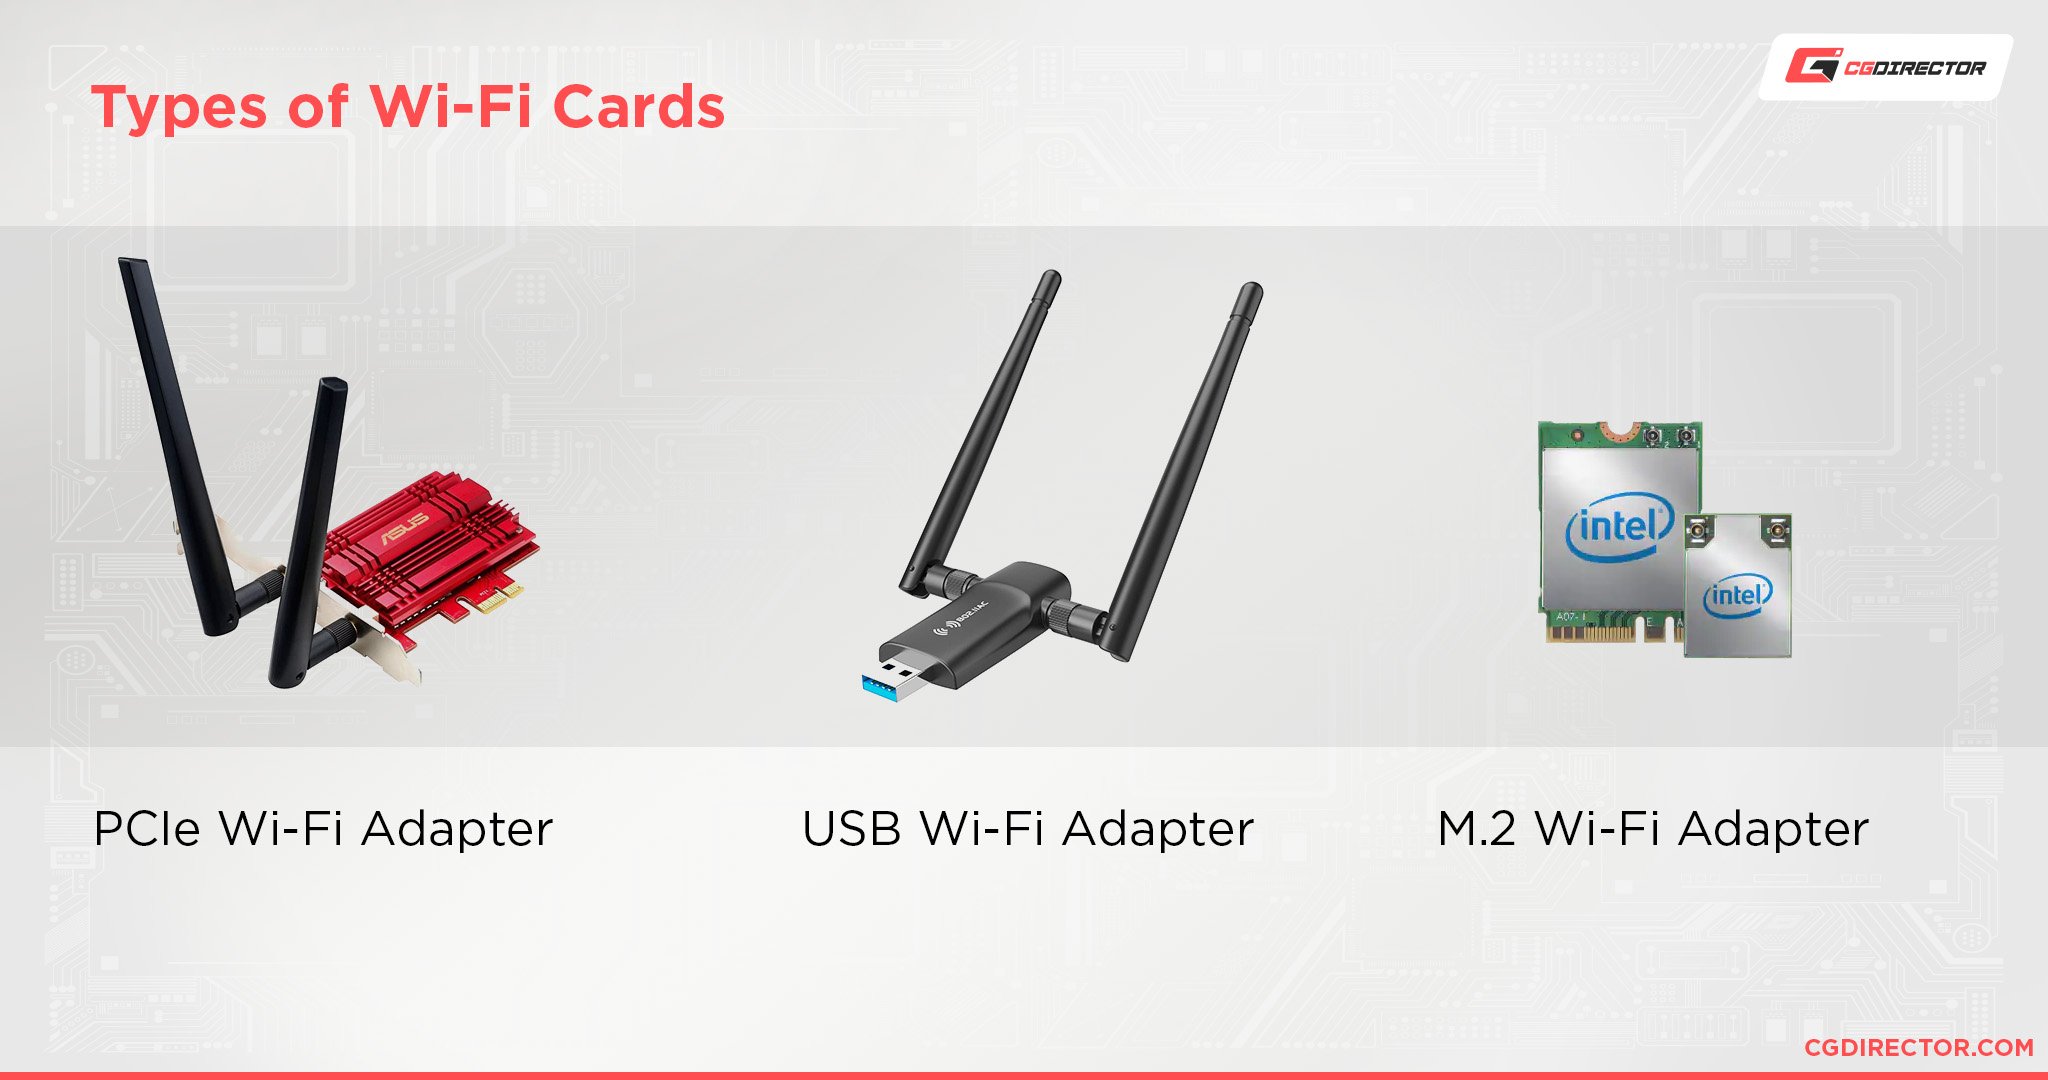 Types of Wi-Fi Cards